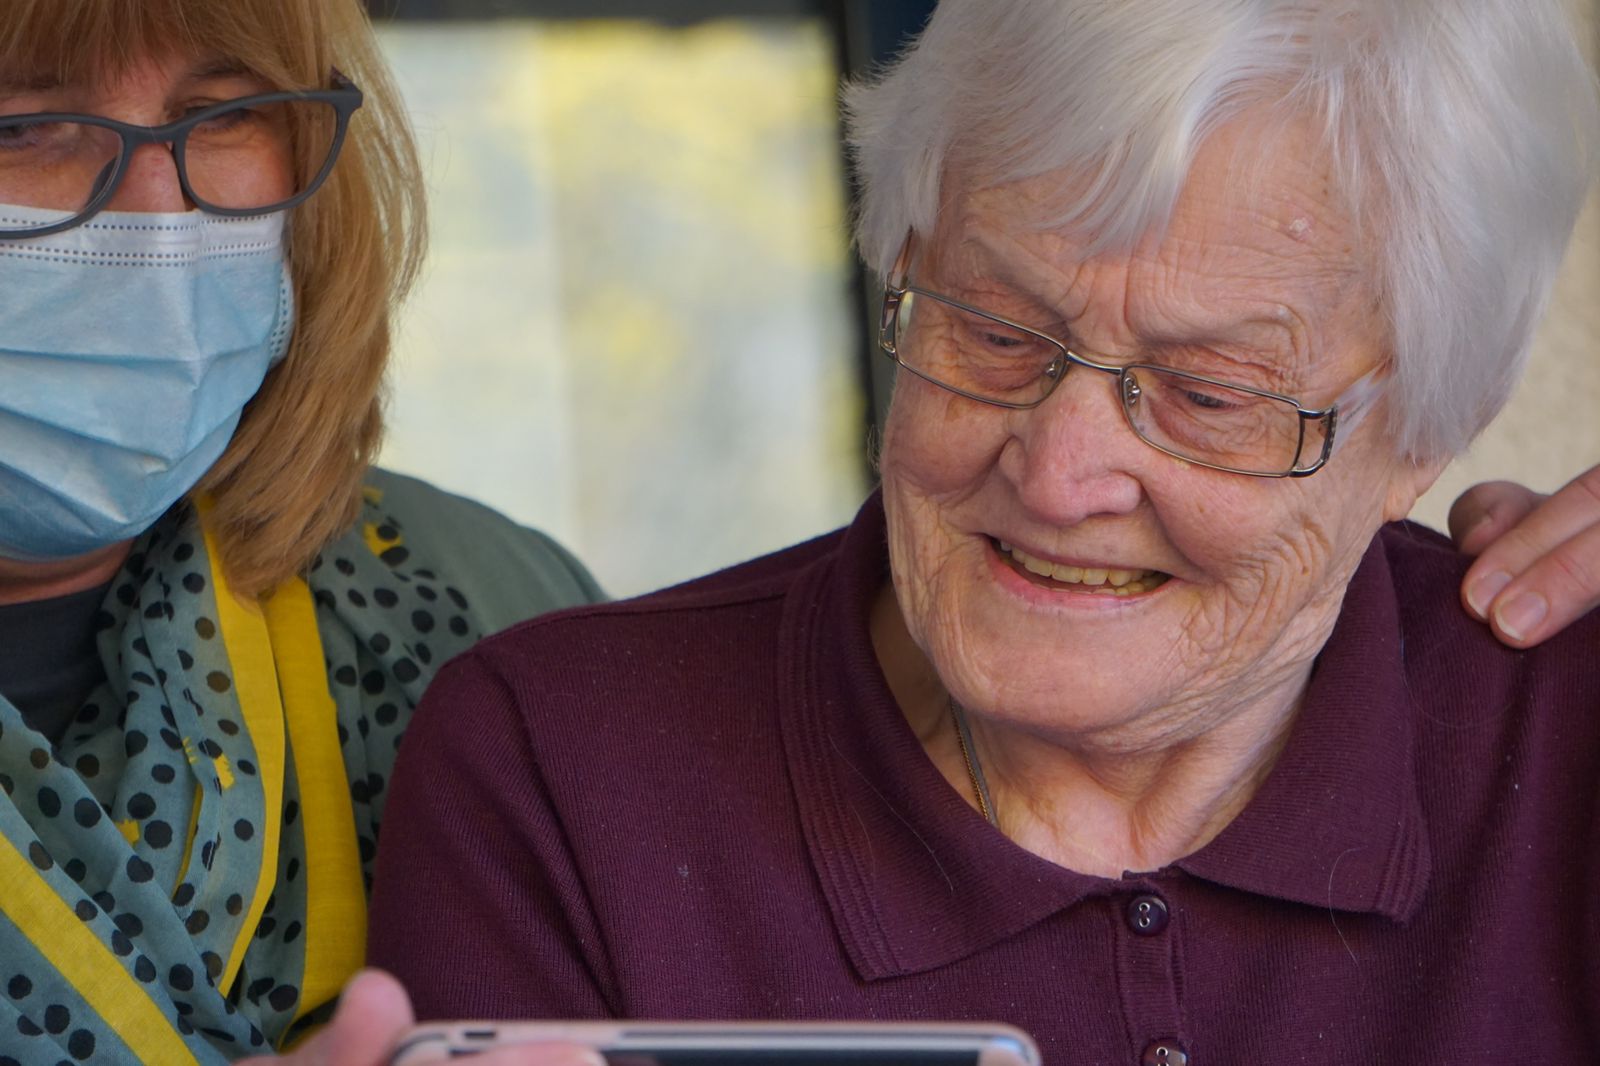 A caregiver wearing a mask is sharing something on her phone to an elderly lady smiling